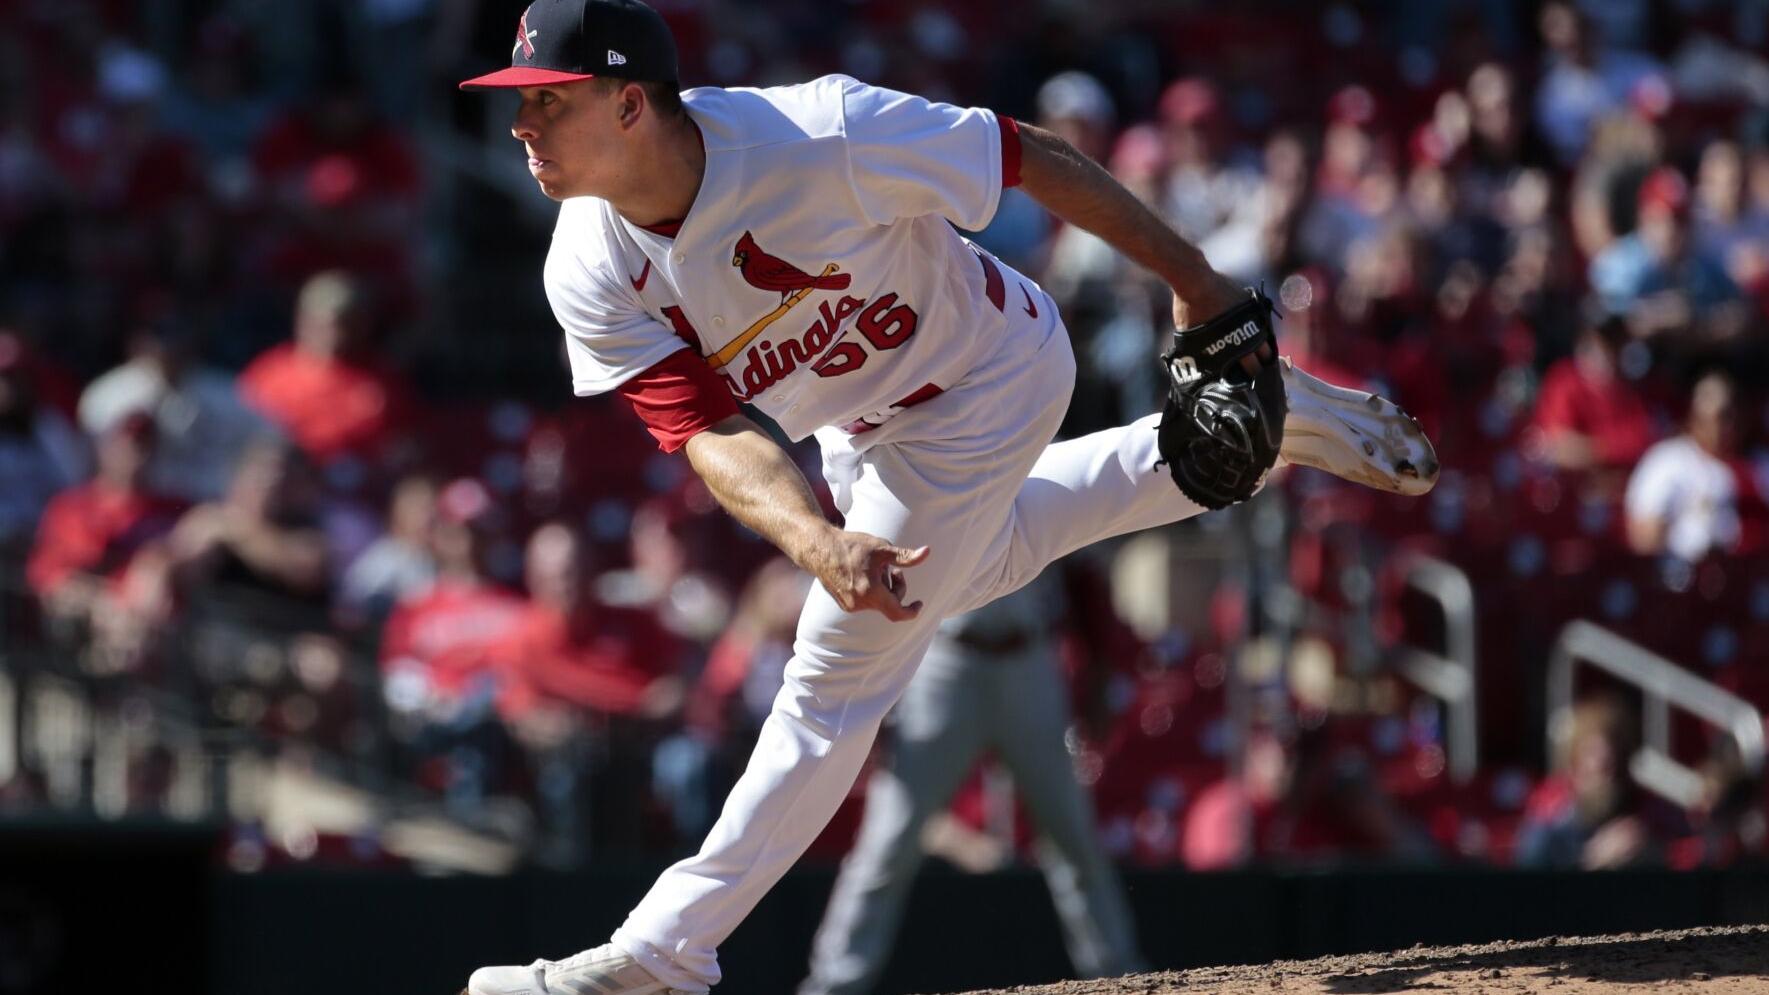 The Ryan Rules: Cardinals stay cool using hotshot reliever Helsley to save him for 'long haul'